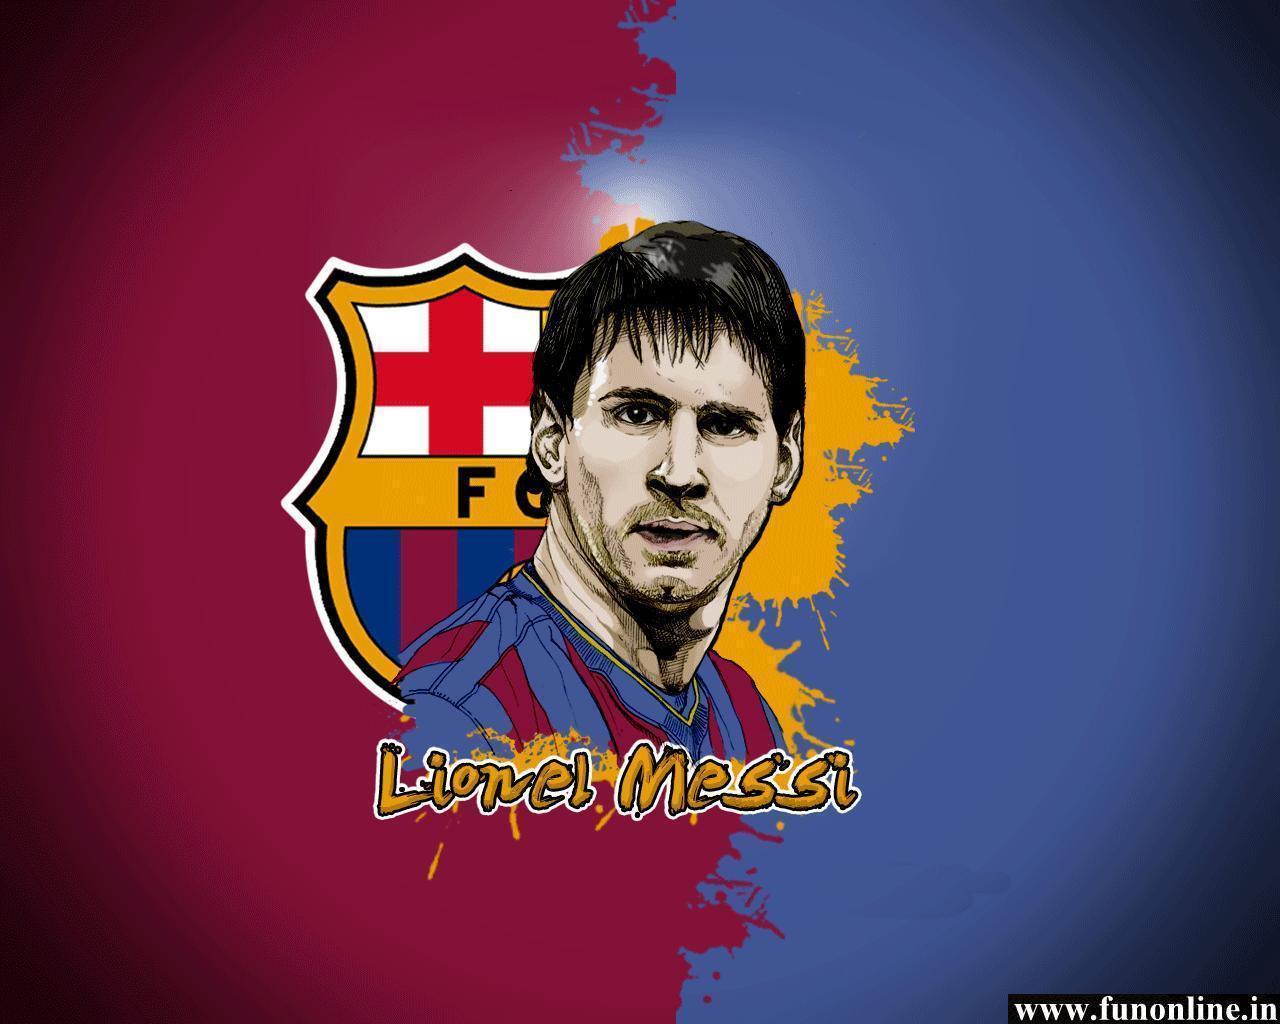 Download Animated Lionel Messi Wallpaper. Full HD Wallpaper